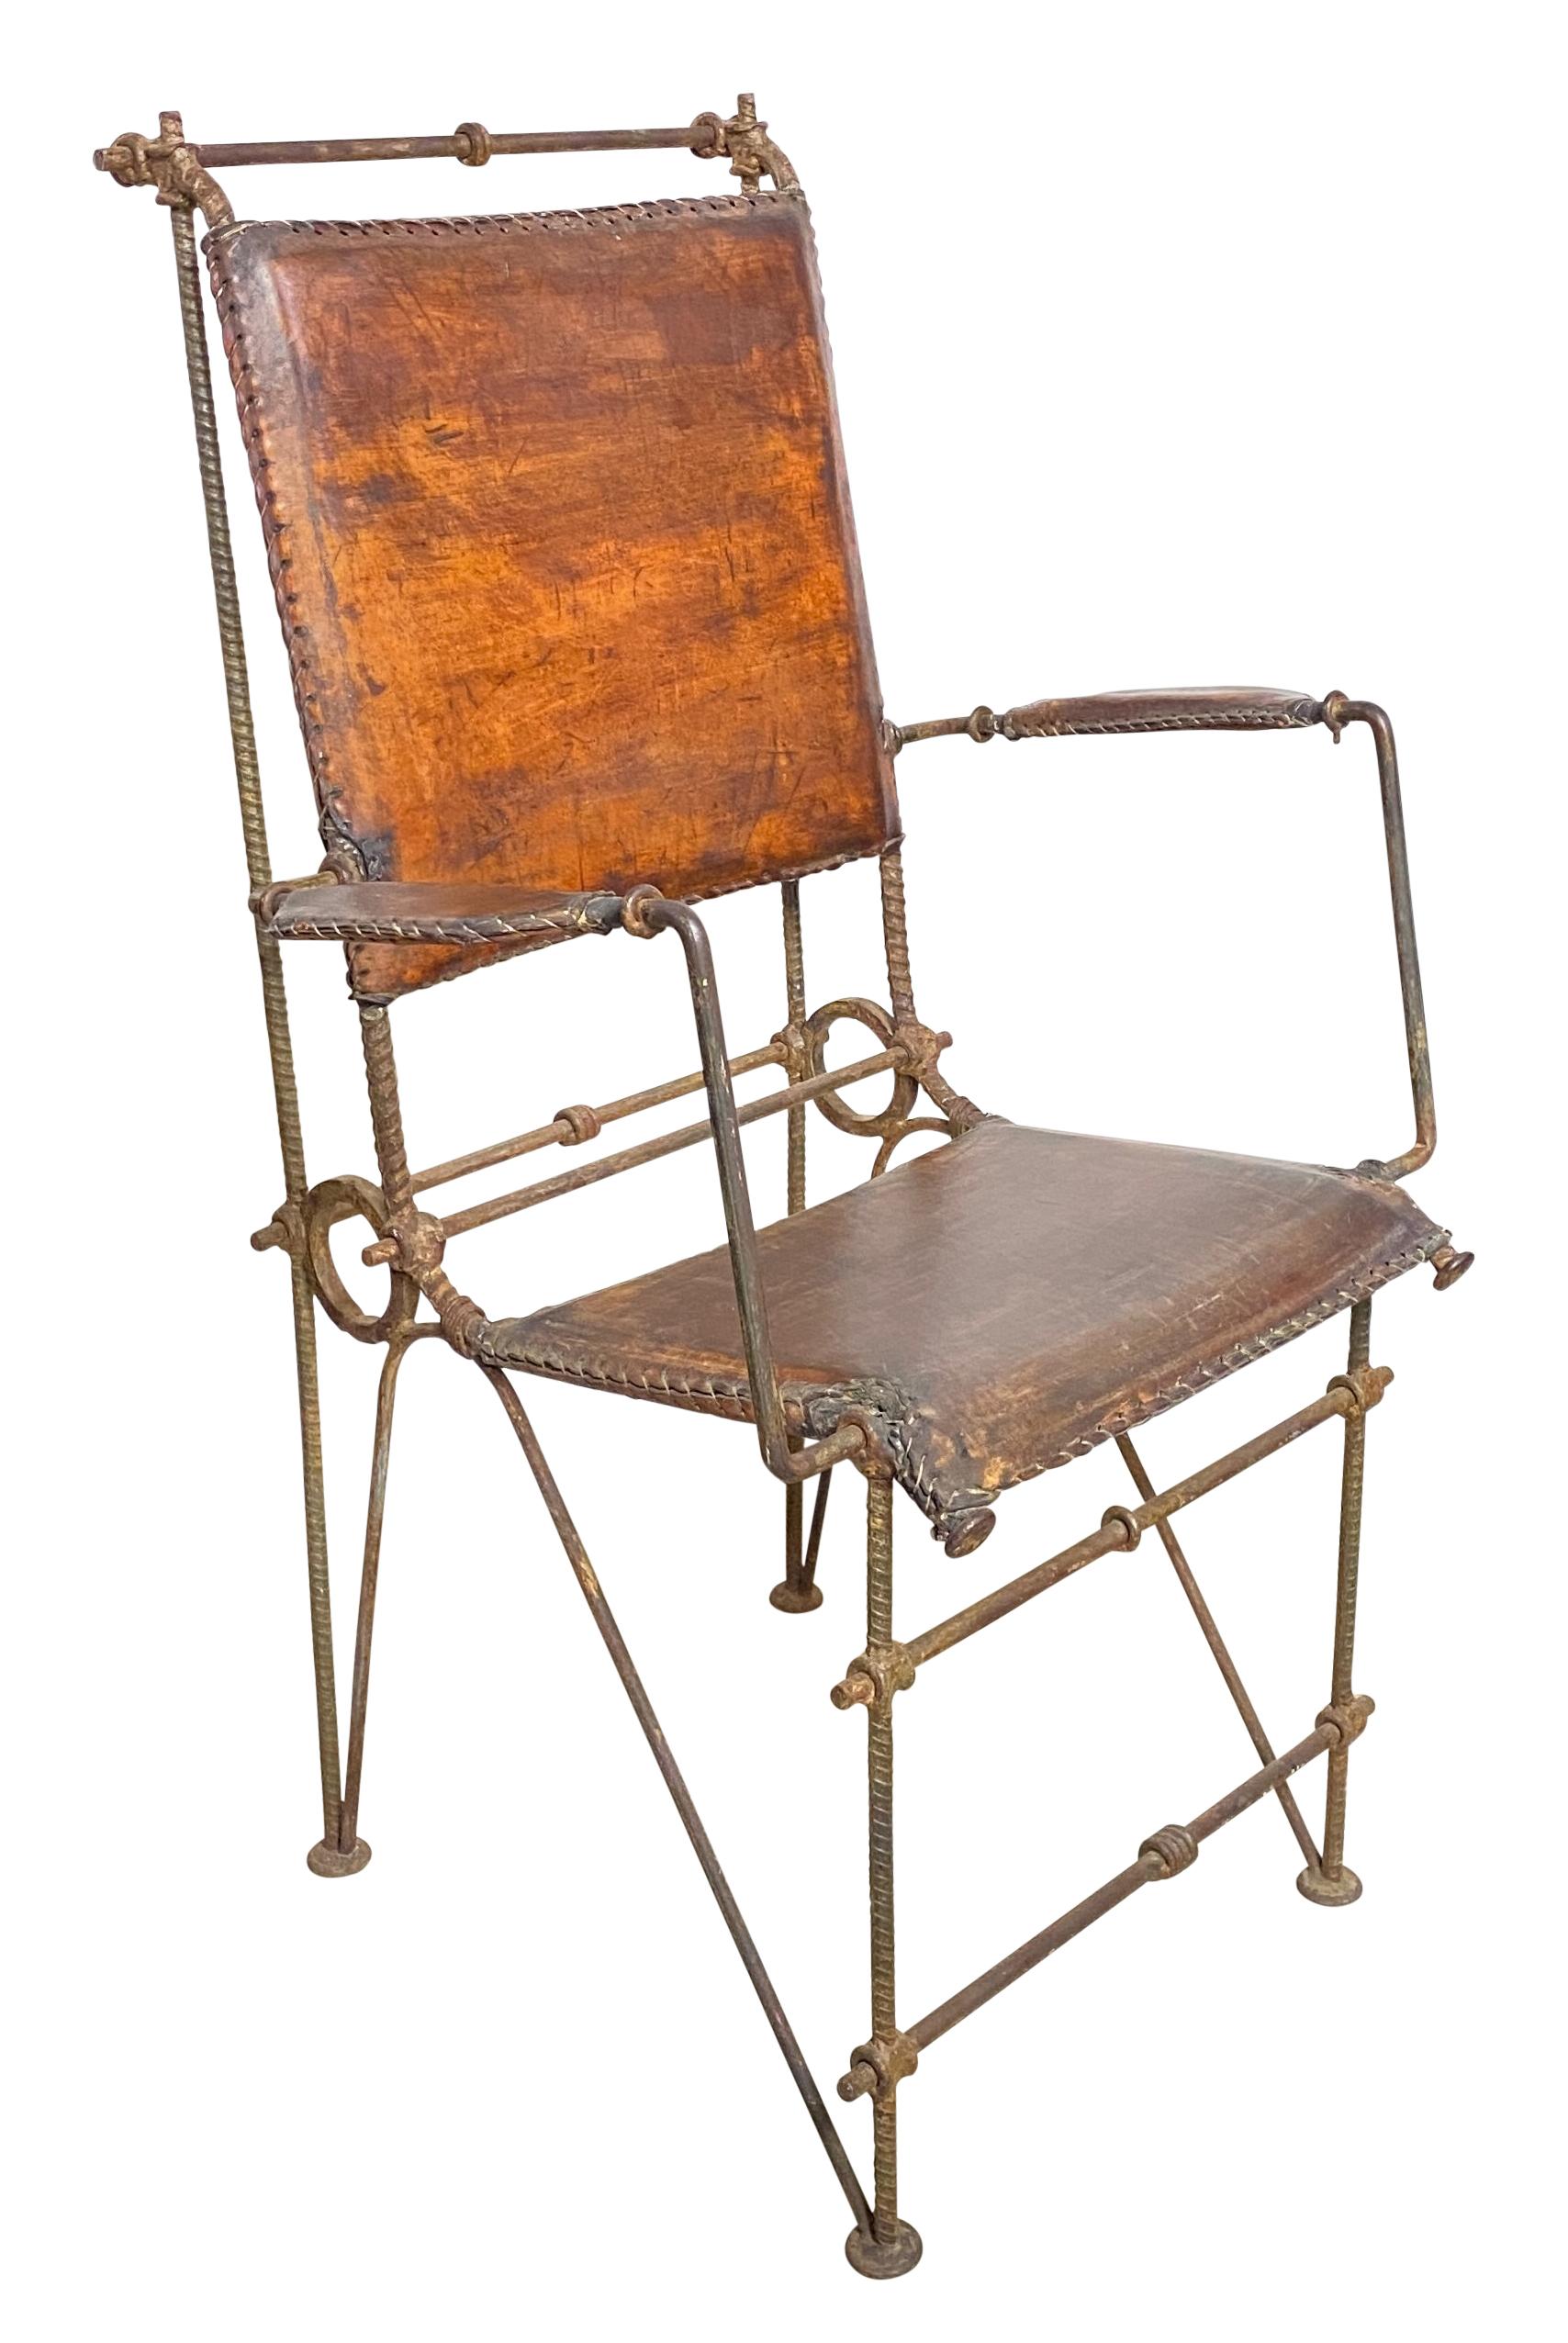 Wonderful iron and leather armchair by the talented Israeli designer Ilana Goor. This chair features distressed leather with a wrought iron rebar structure. 
In very good original condition.

Ilana Goor was born in Isreal in 1936. She attended the